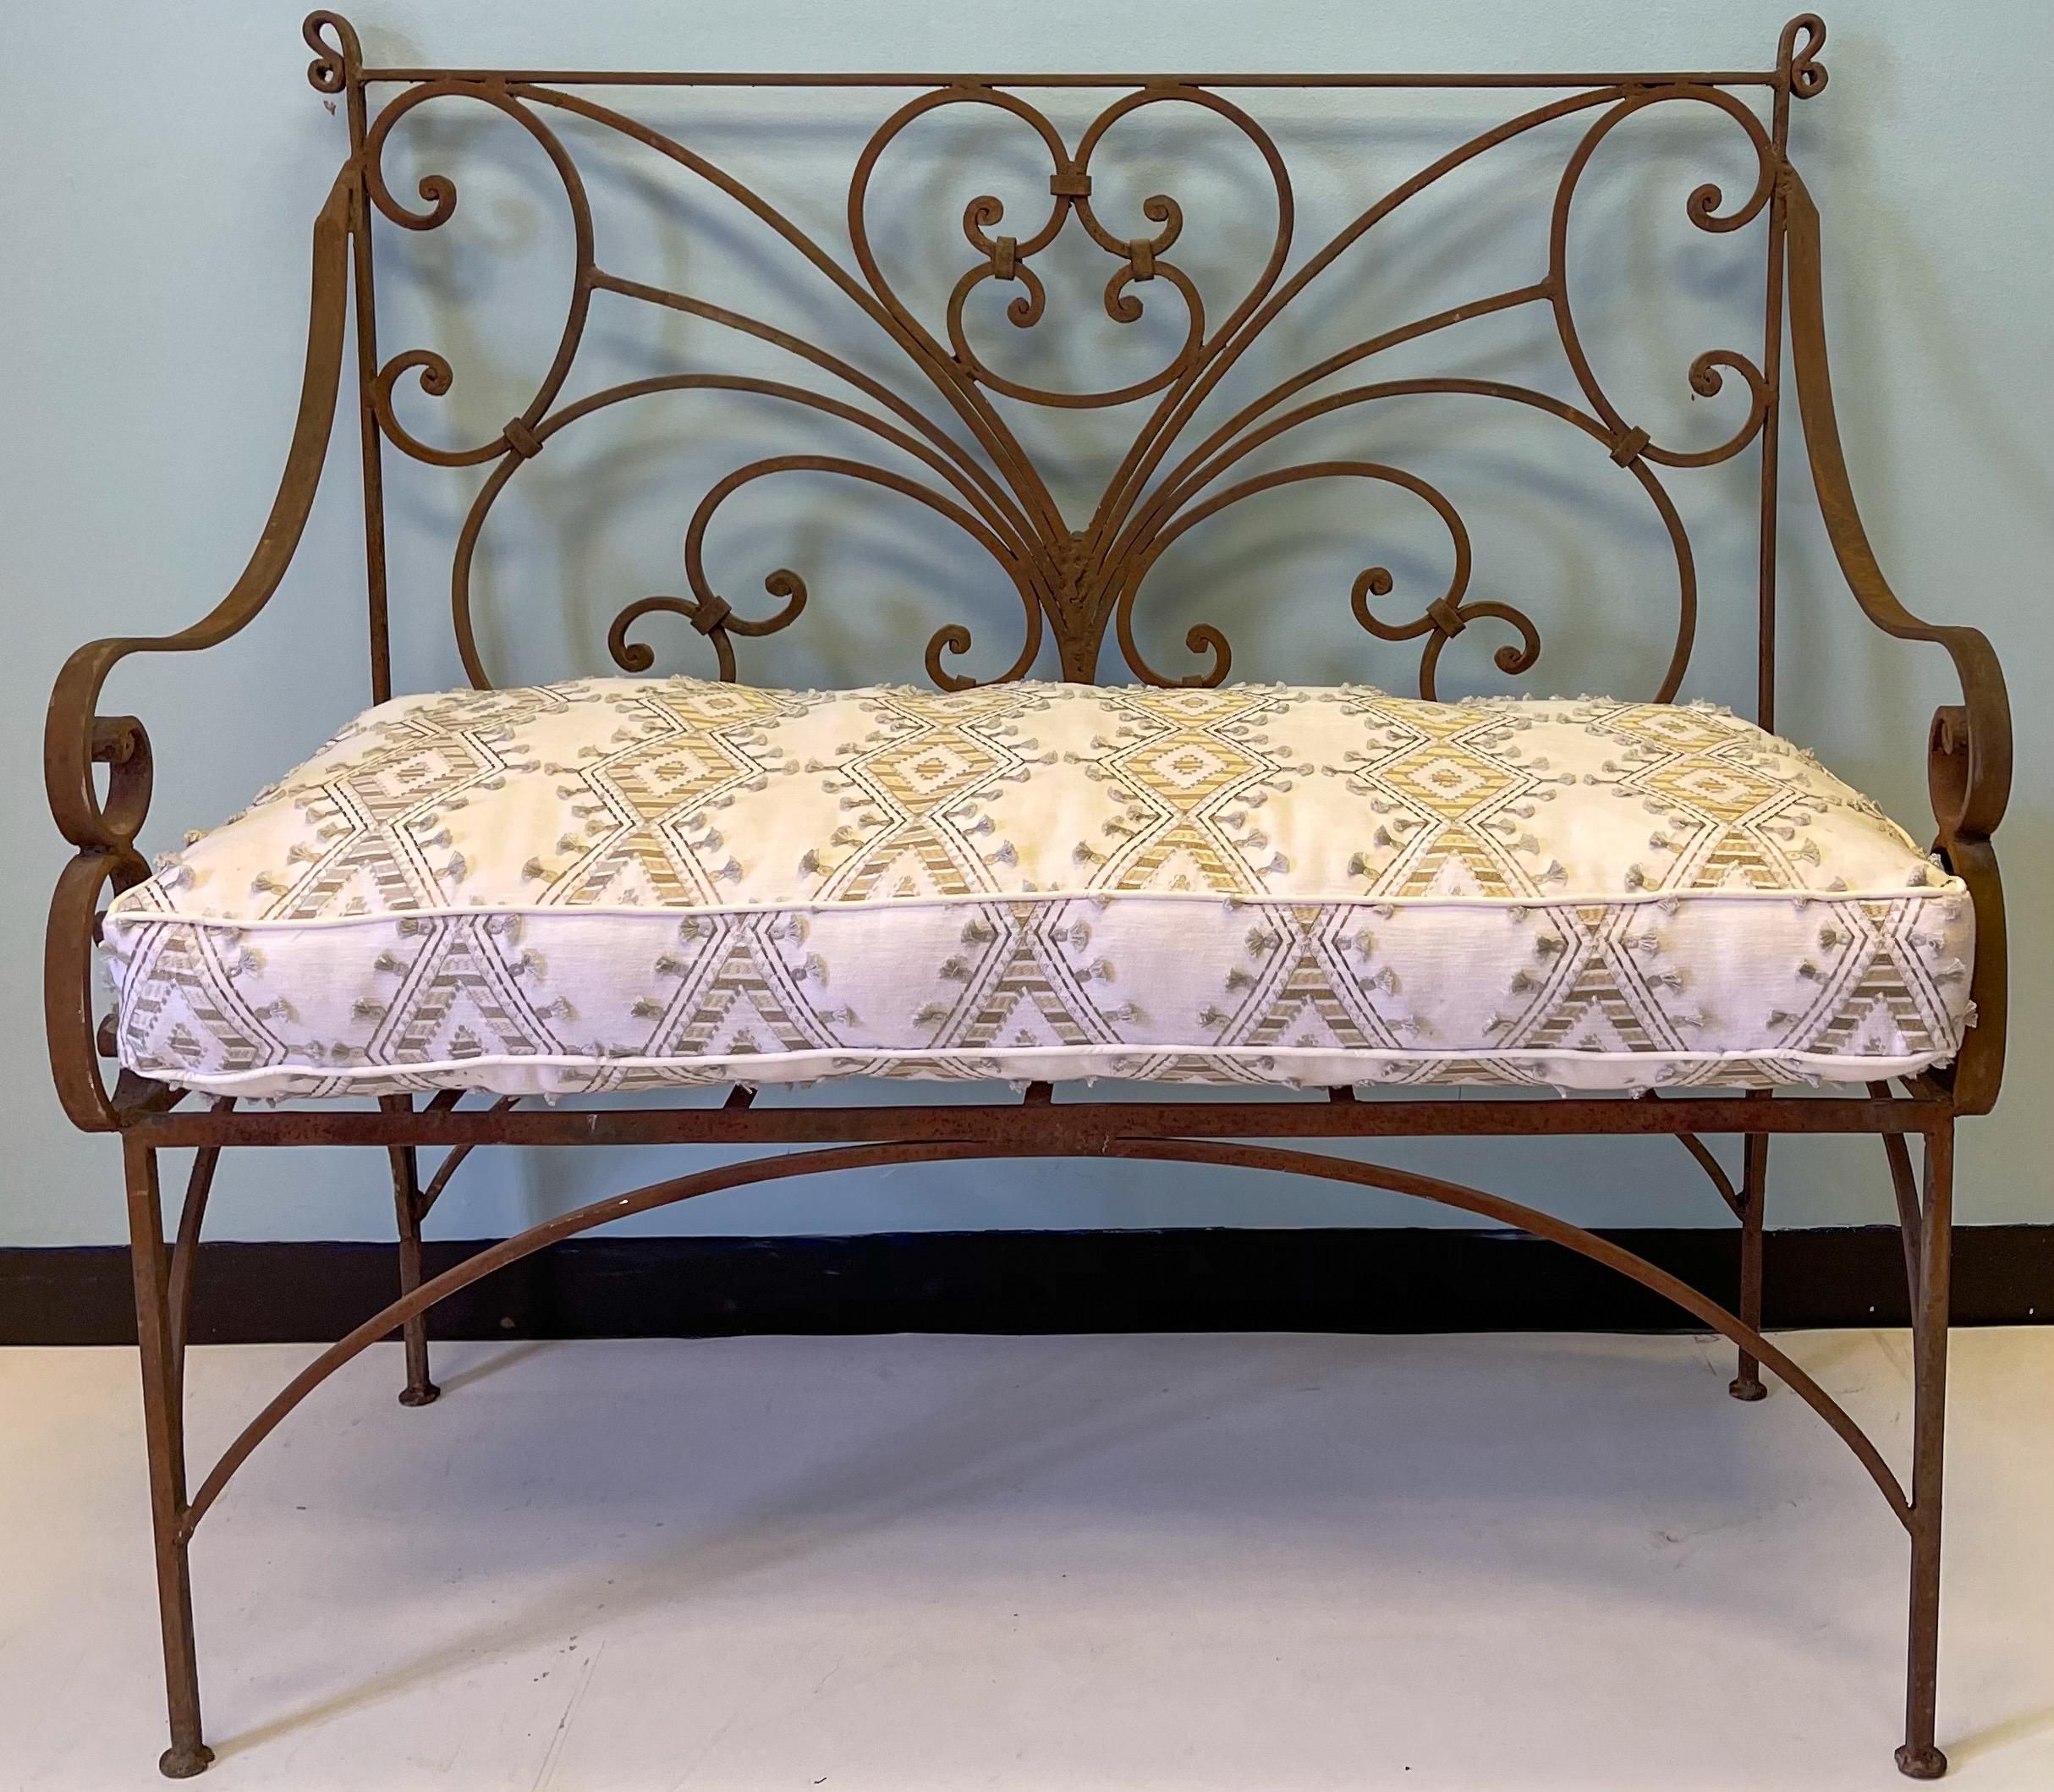 This is a wonderful mid-century French scrolling iron garden settee or bench. The white cushion is new. The metal does show some age wear.